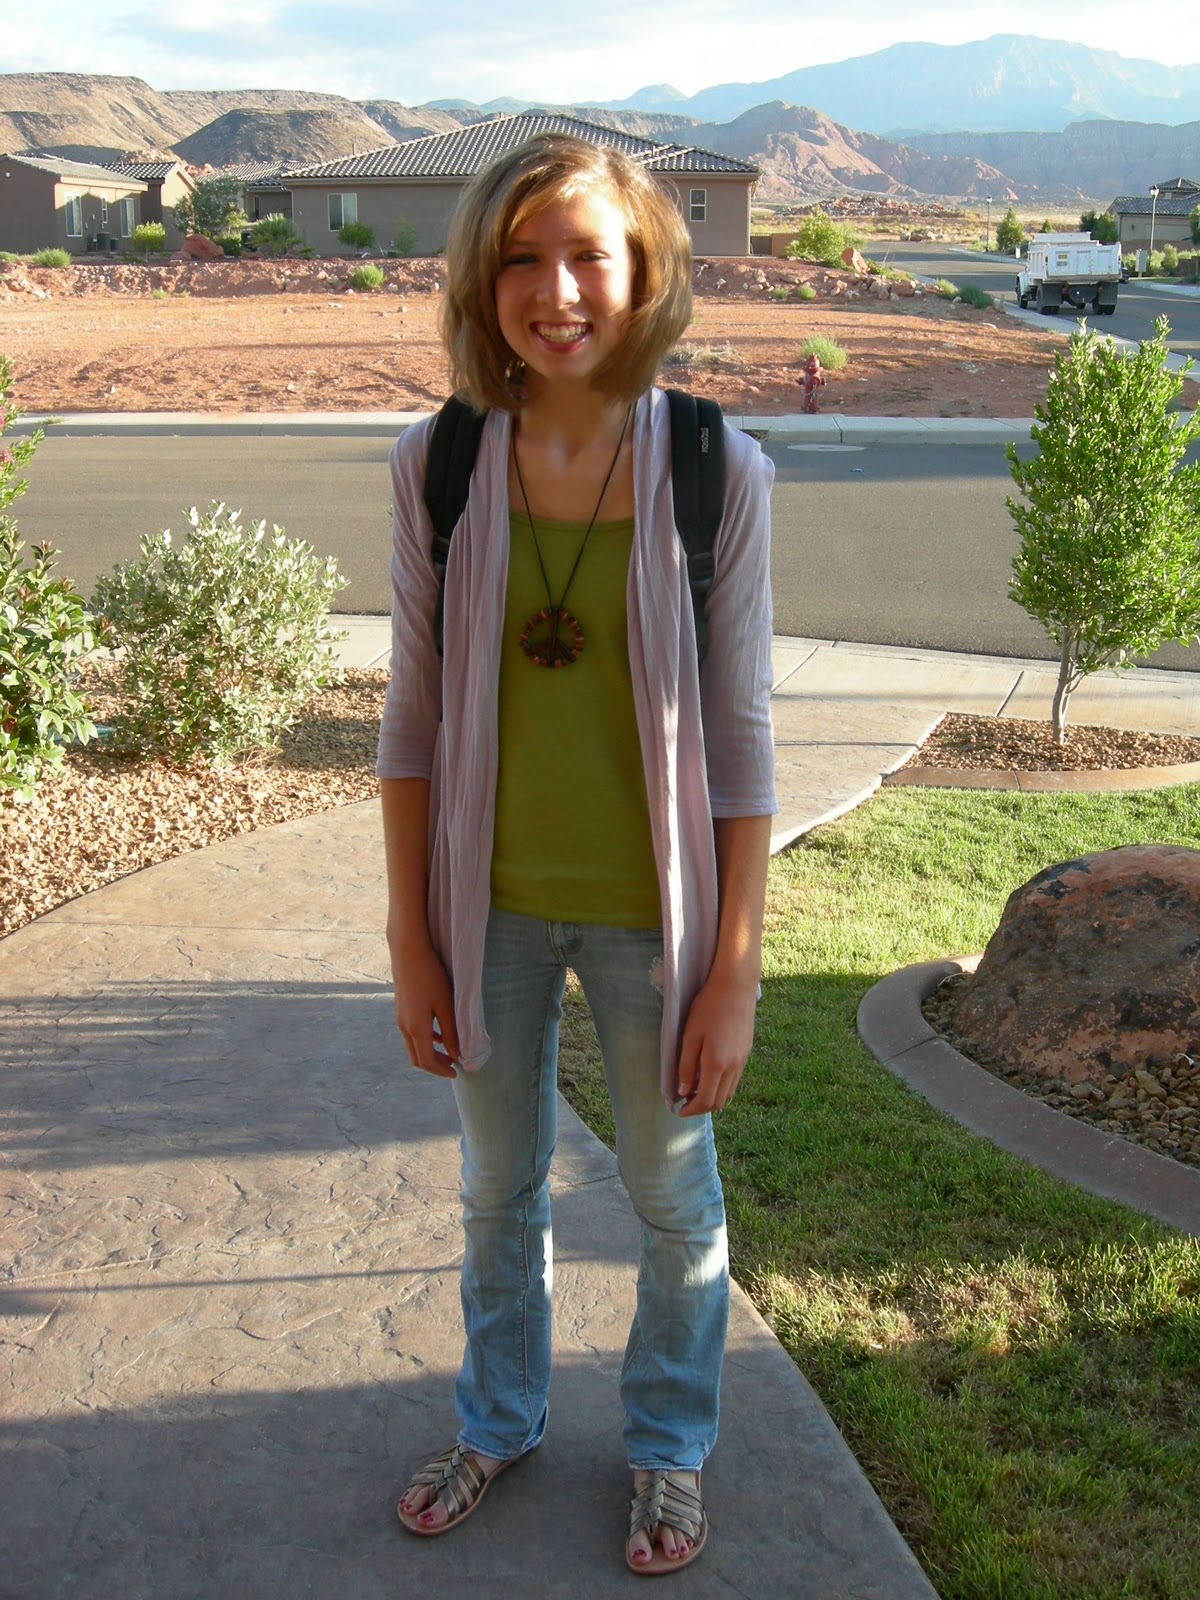 Plumb Crazy!: First Day of School 2010